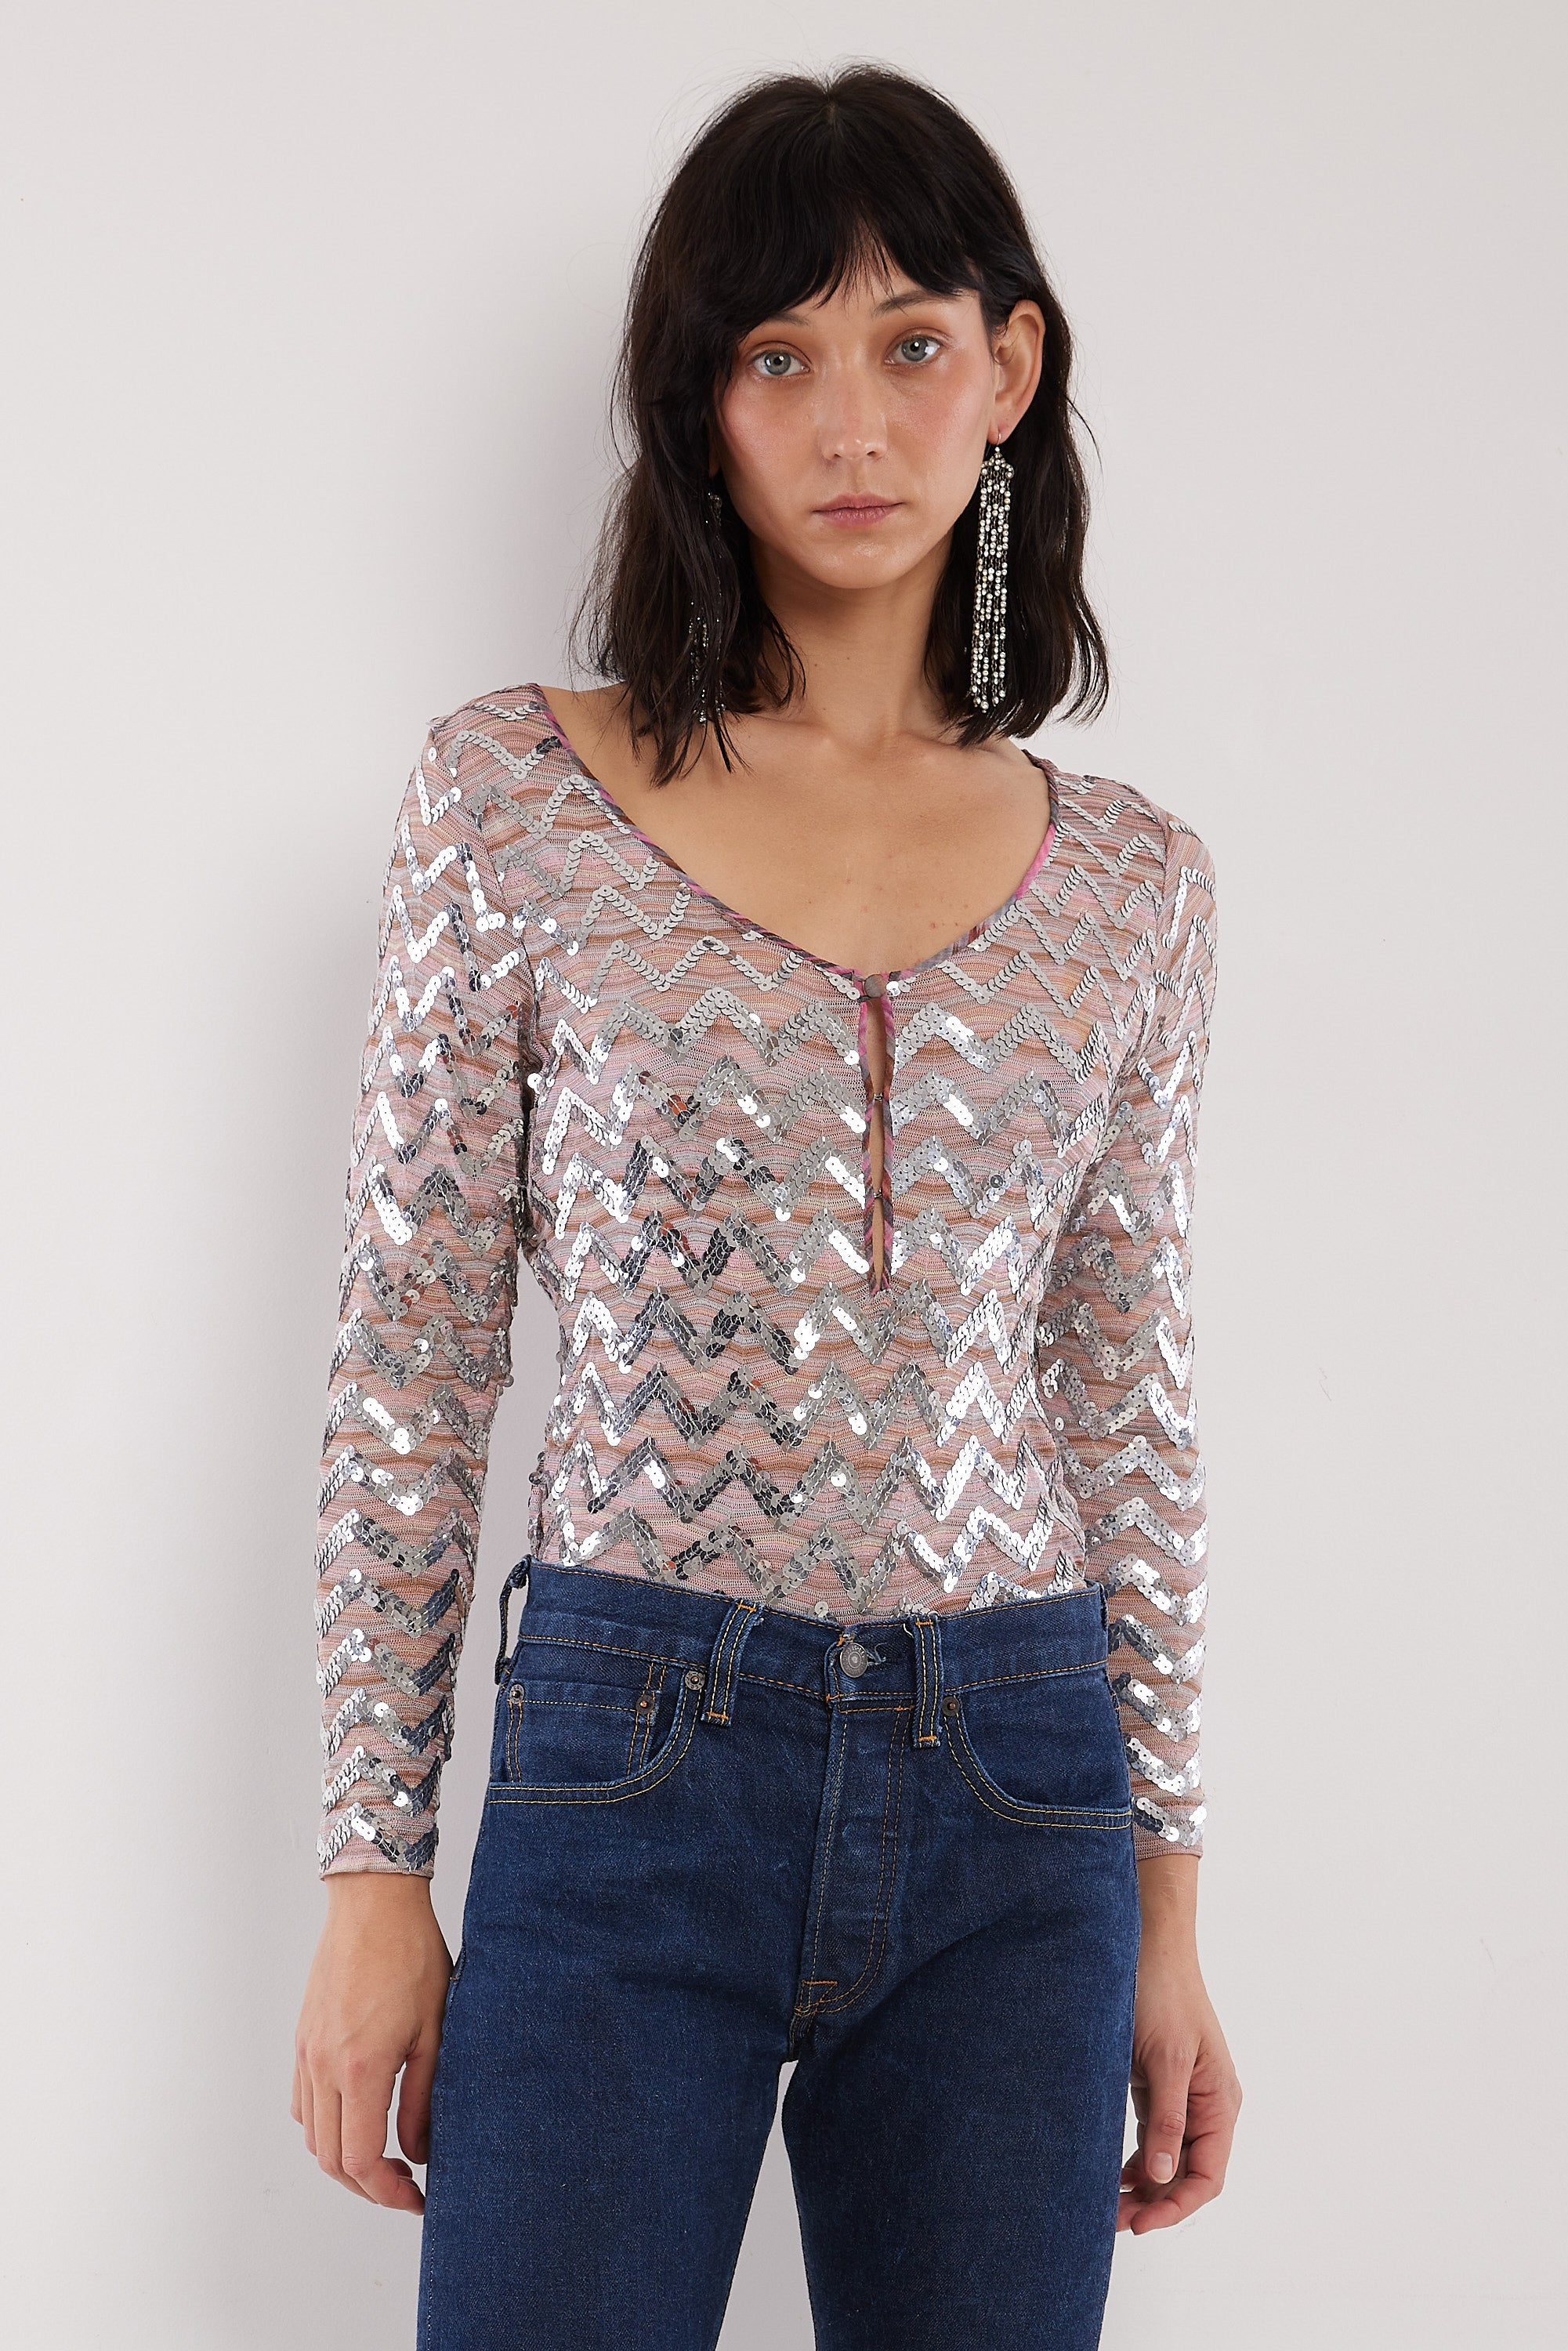 Missoni <br> S/S 2001 runway silver sequin keyhole top